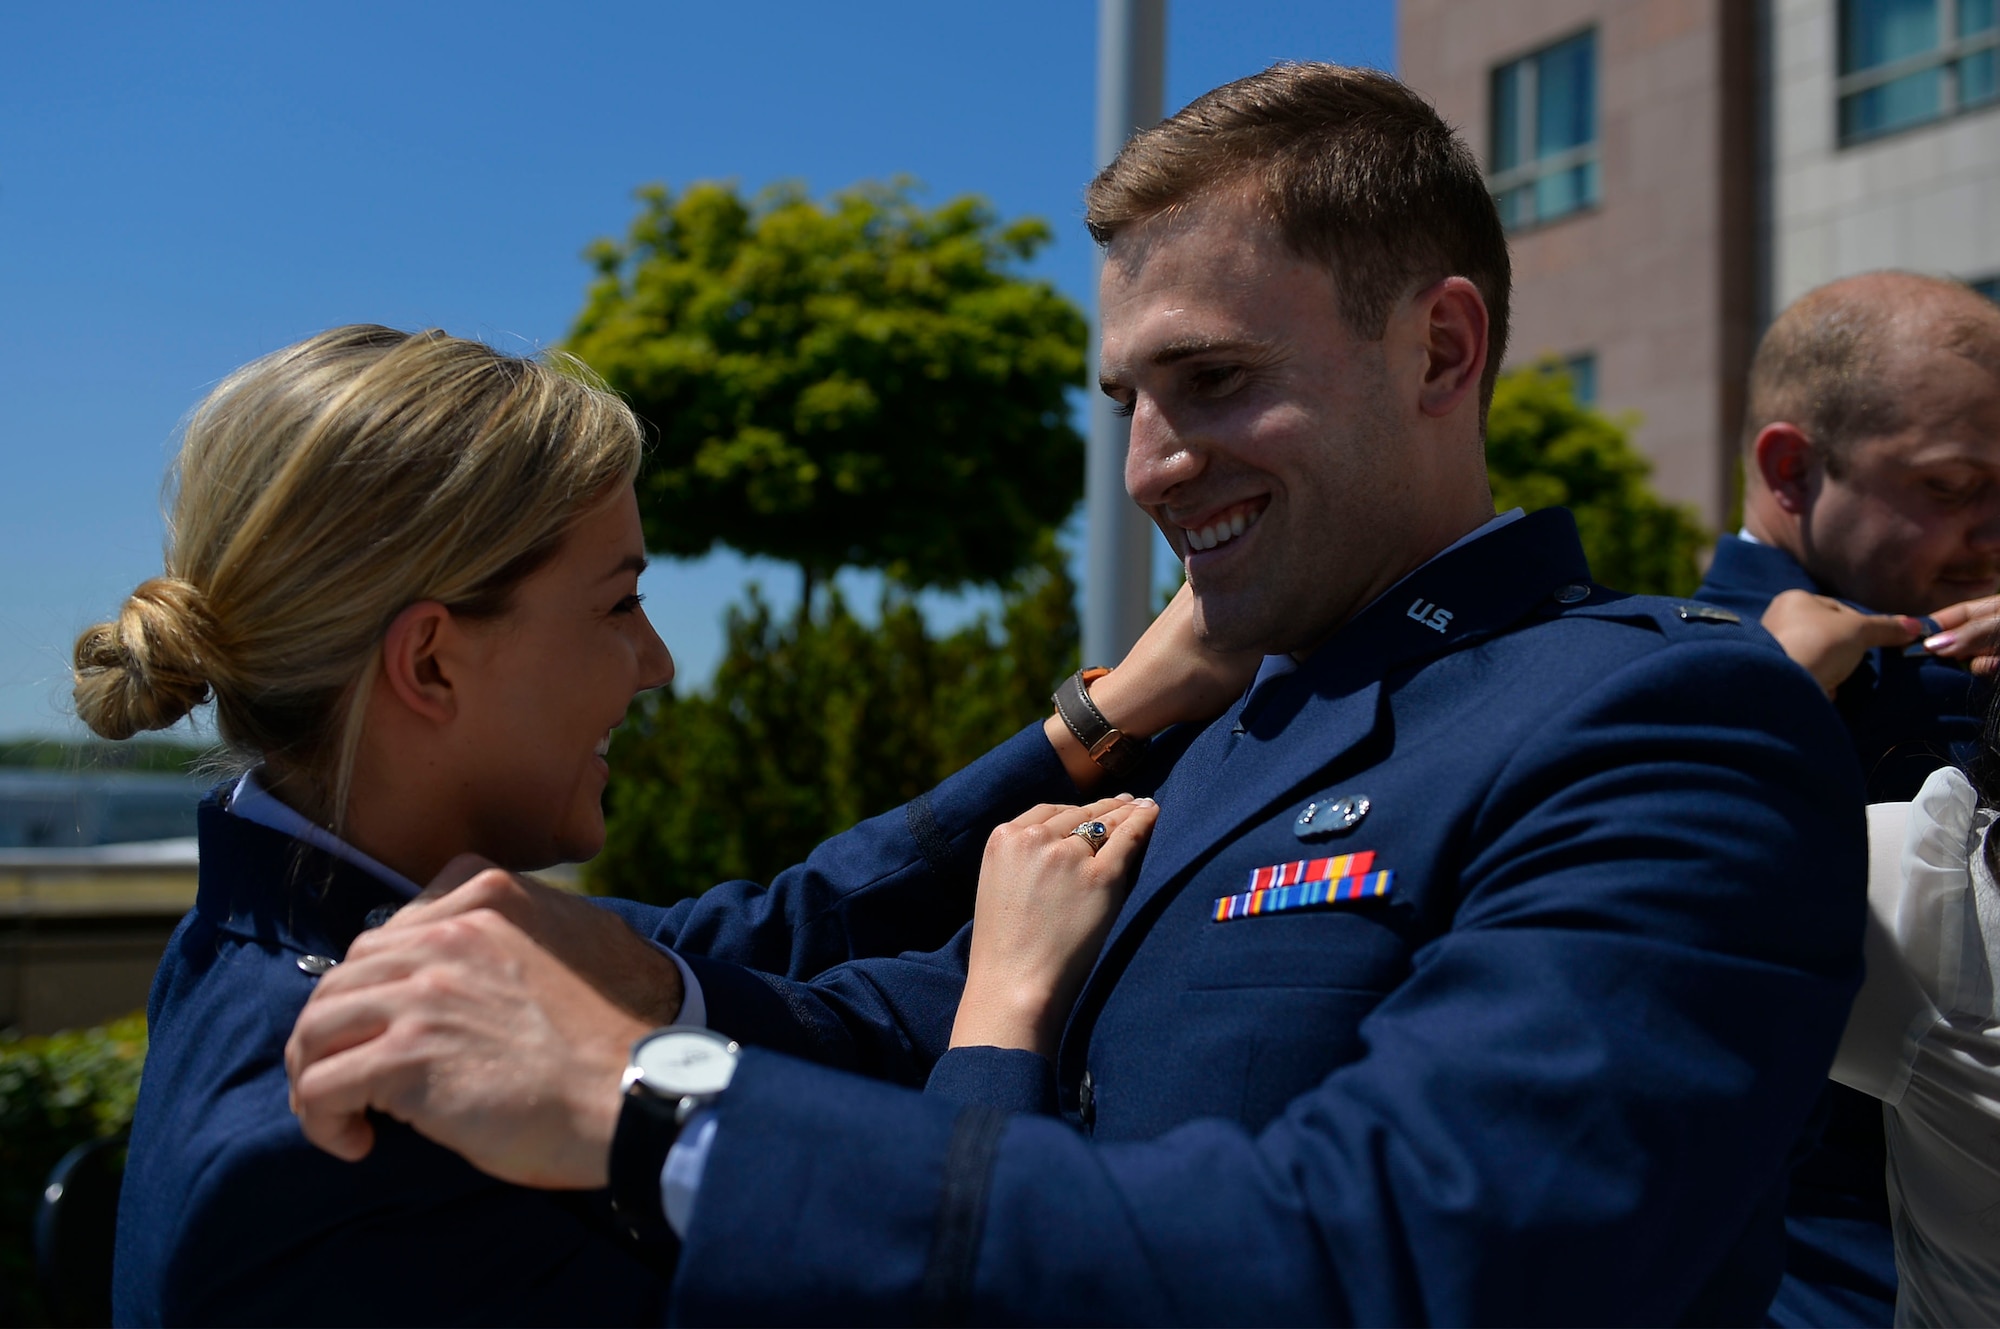 U.S. Air Force Capts. Haley Wilson, 603rd Air Operations Center strategy division officer, left, and Kevin Durr, Warrior Preparation Center program manager, pin their new ranks on each other during their promotion ceremony on Ramstein Air Base, Germany, May 26, 2017. The ceremony was presided over by Lt. Gen. Richard M. Clark, 3rd Air Force commander. (U.S. Air Force photo by Airman 1st Class Joshua Magbanua) 